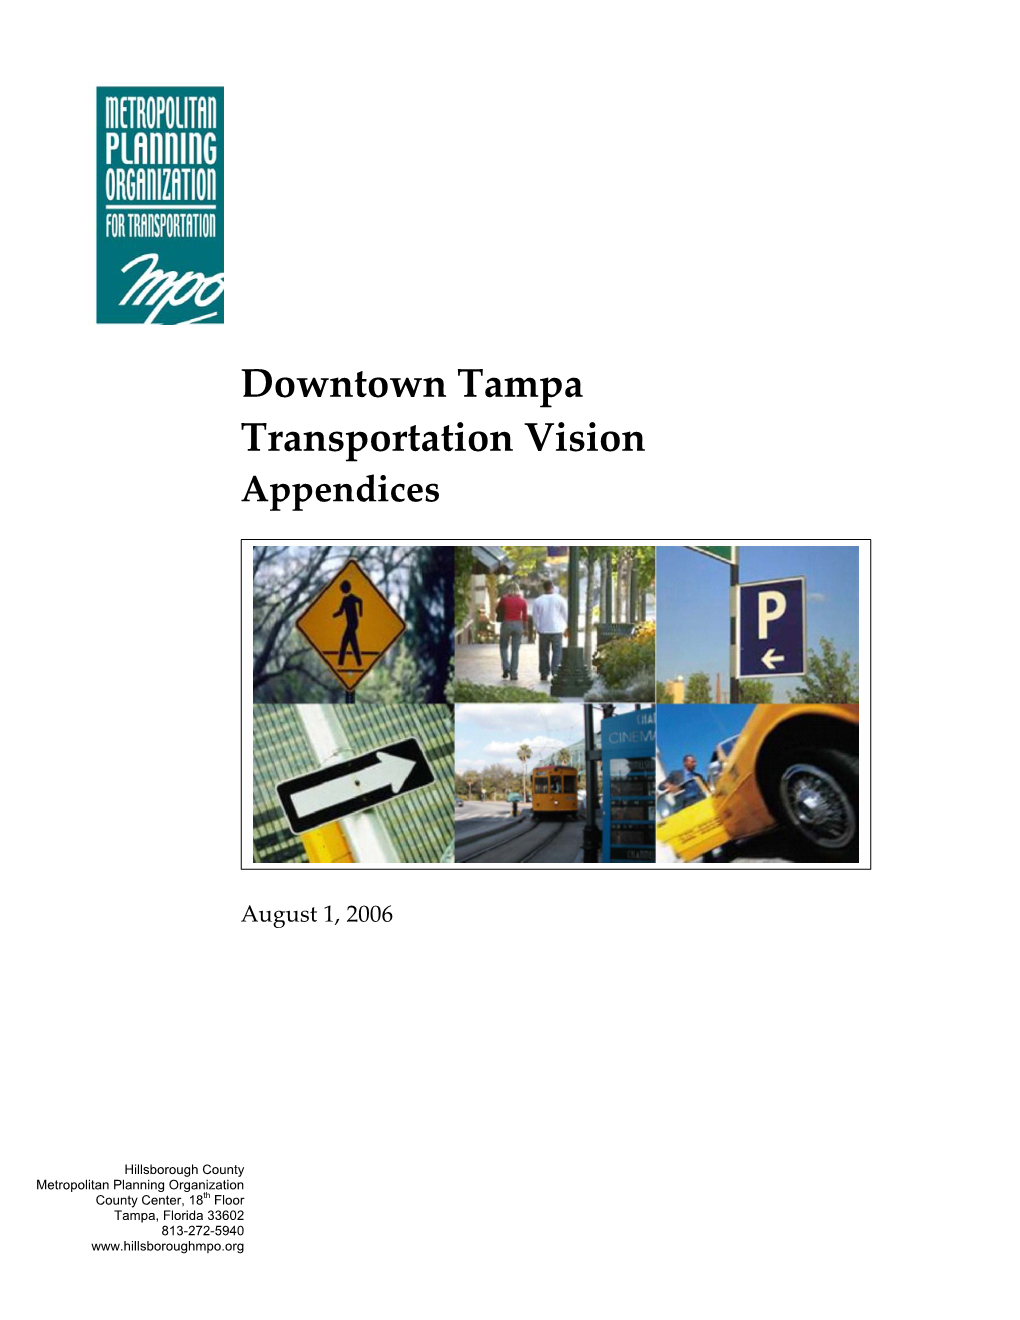 Downtown Tampa Transportation Vision Appendices